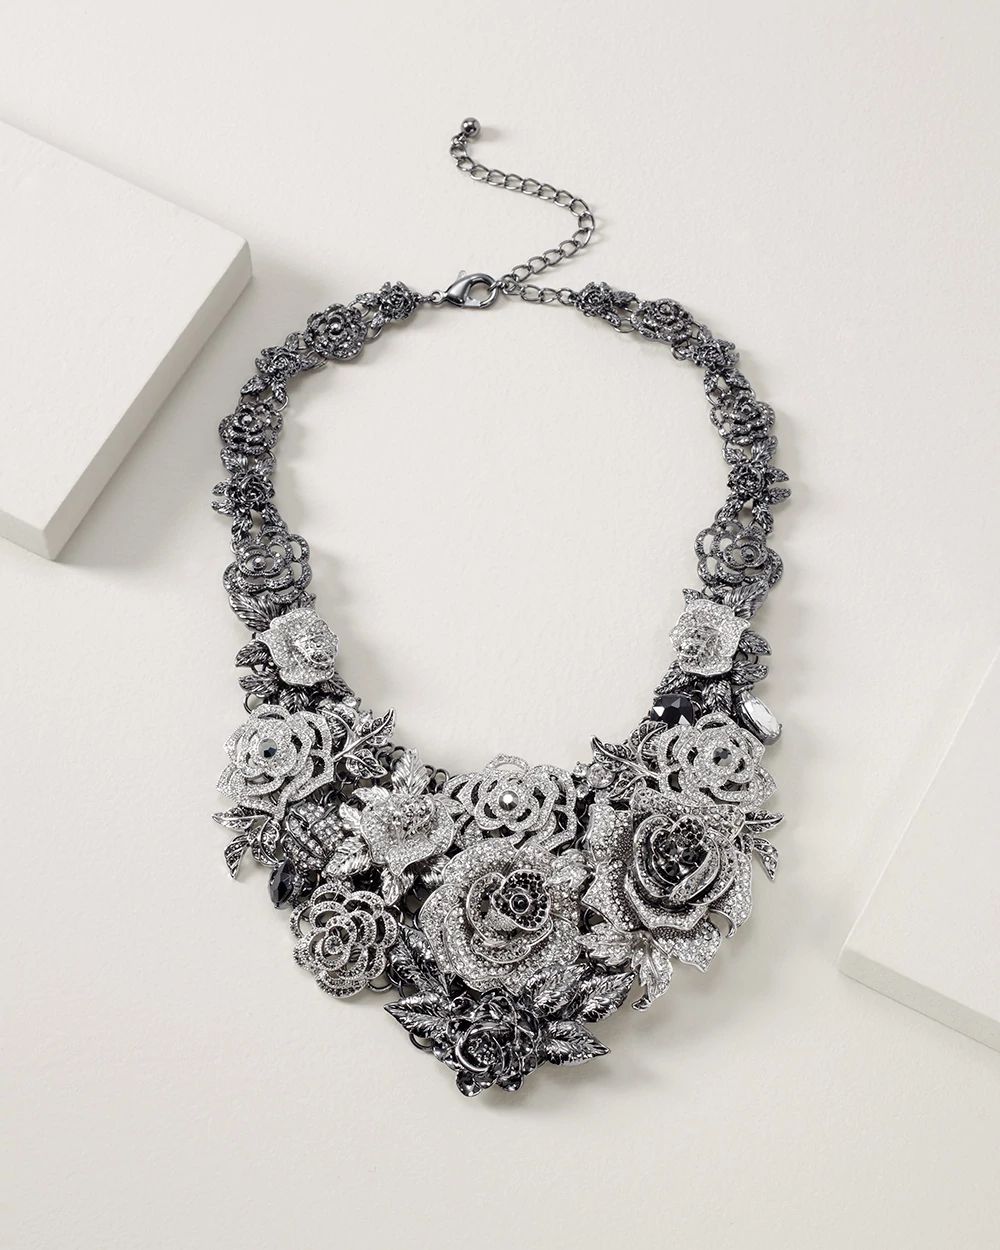 Crystal Flower Statement Necklace click to view larger image.